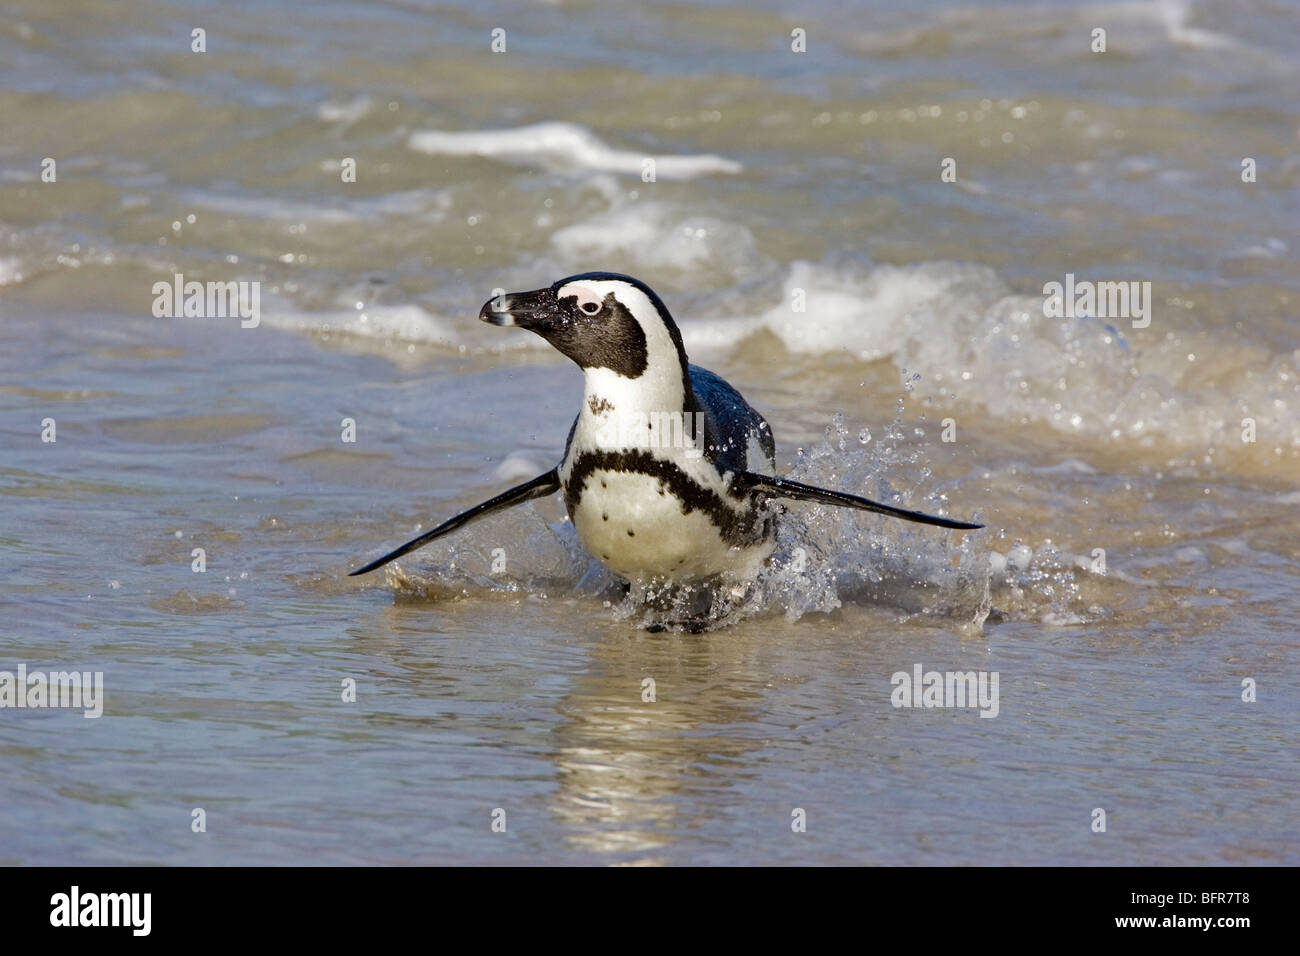 African Penguin leaving the water beaching itself Stock Photo